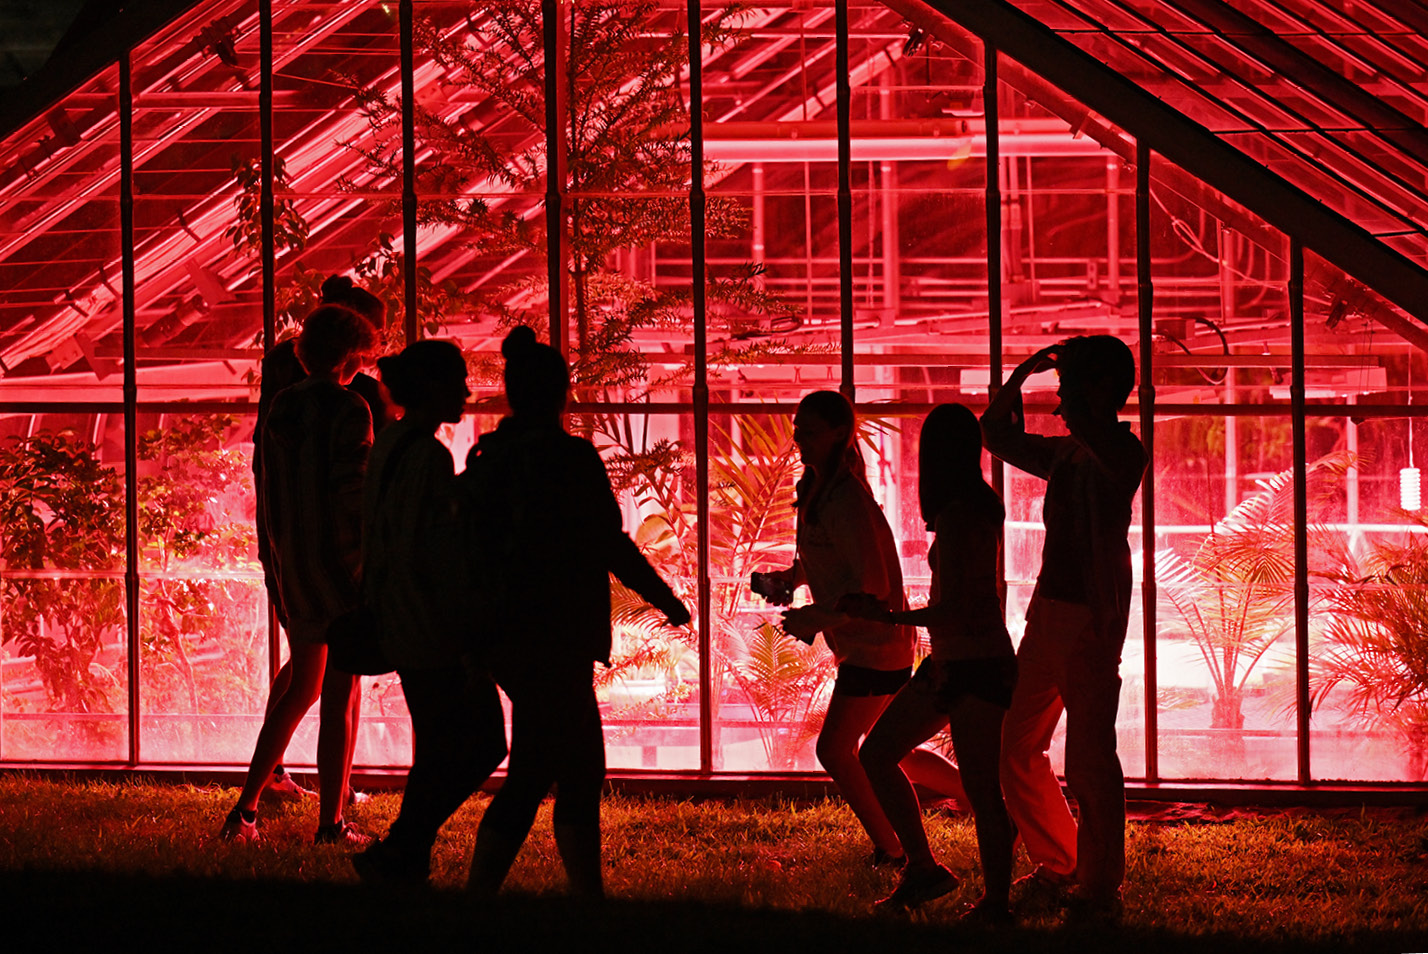 Students silhouetted in front of the green house at night.